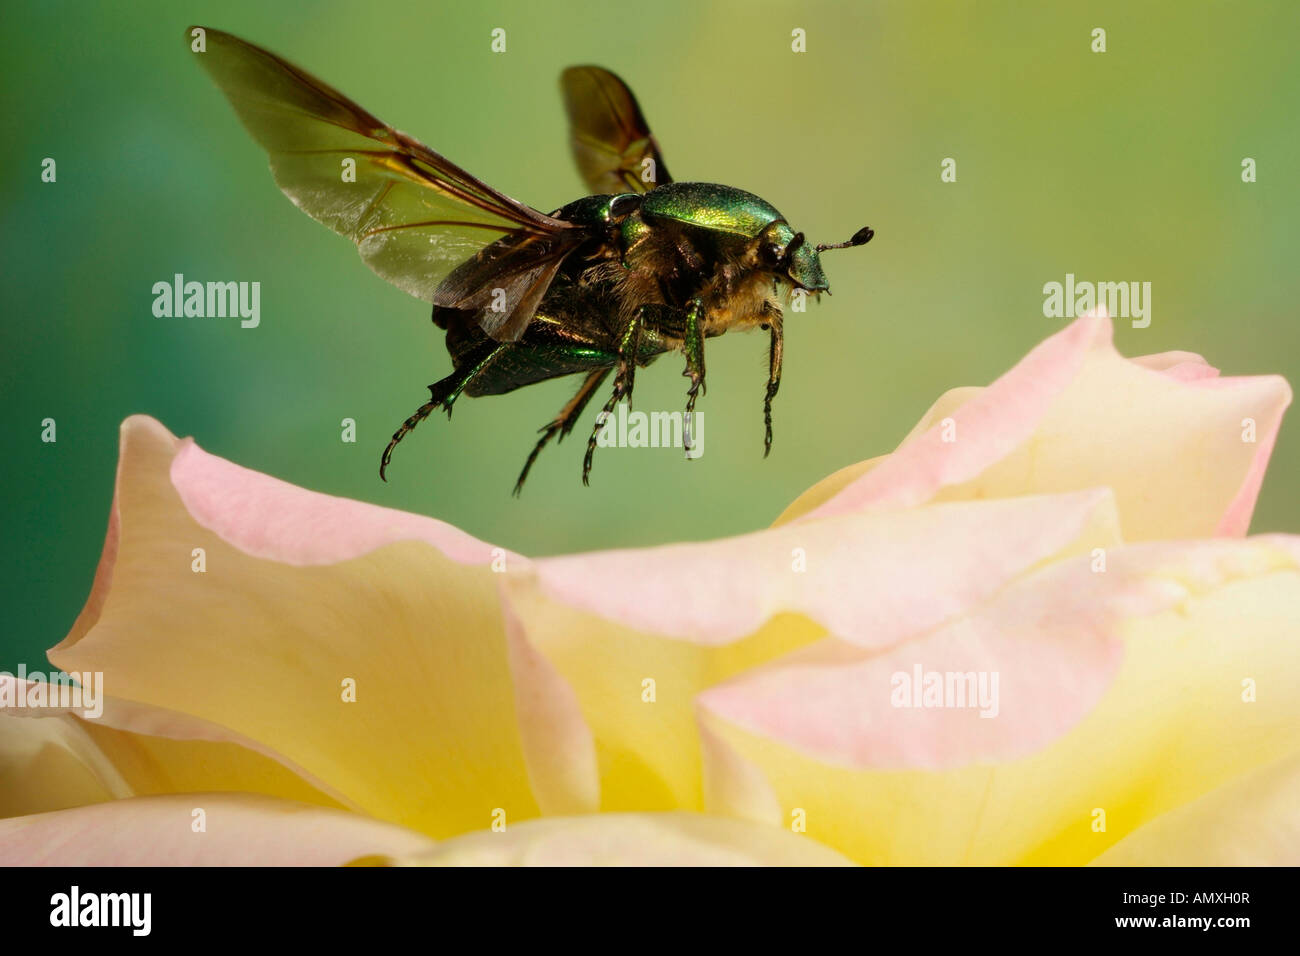 Close-up of Green Rose chafer (Cetonia aurata) hovering over flower Stock Photo